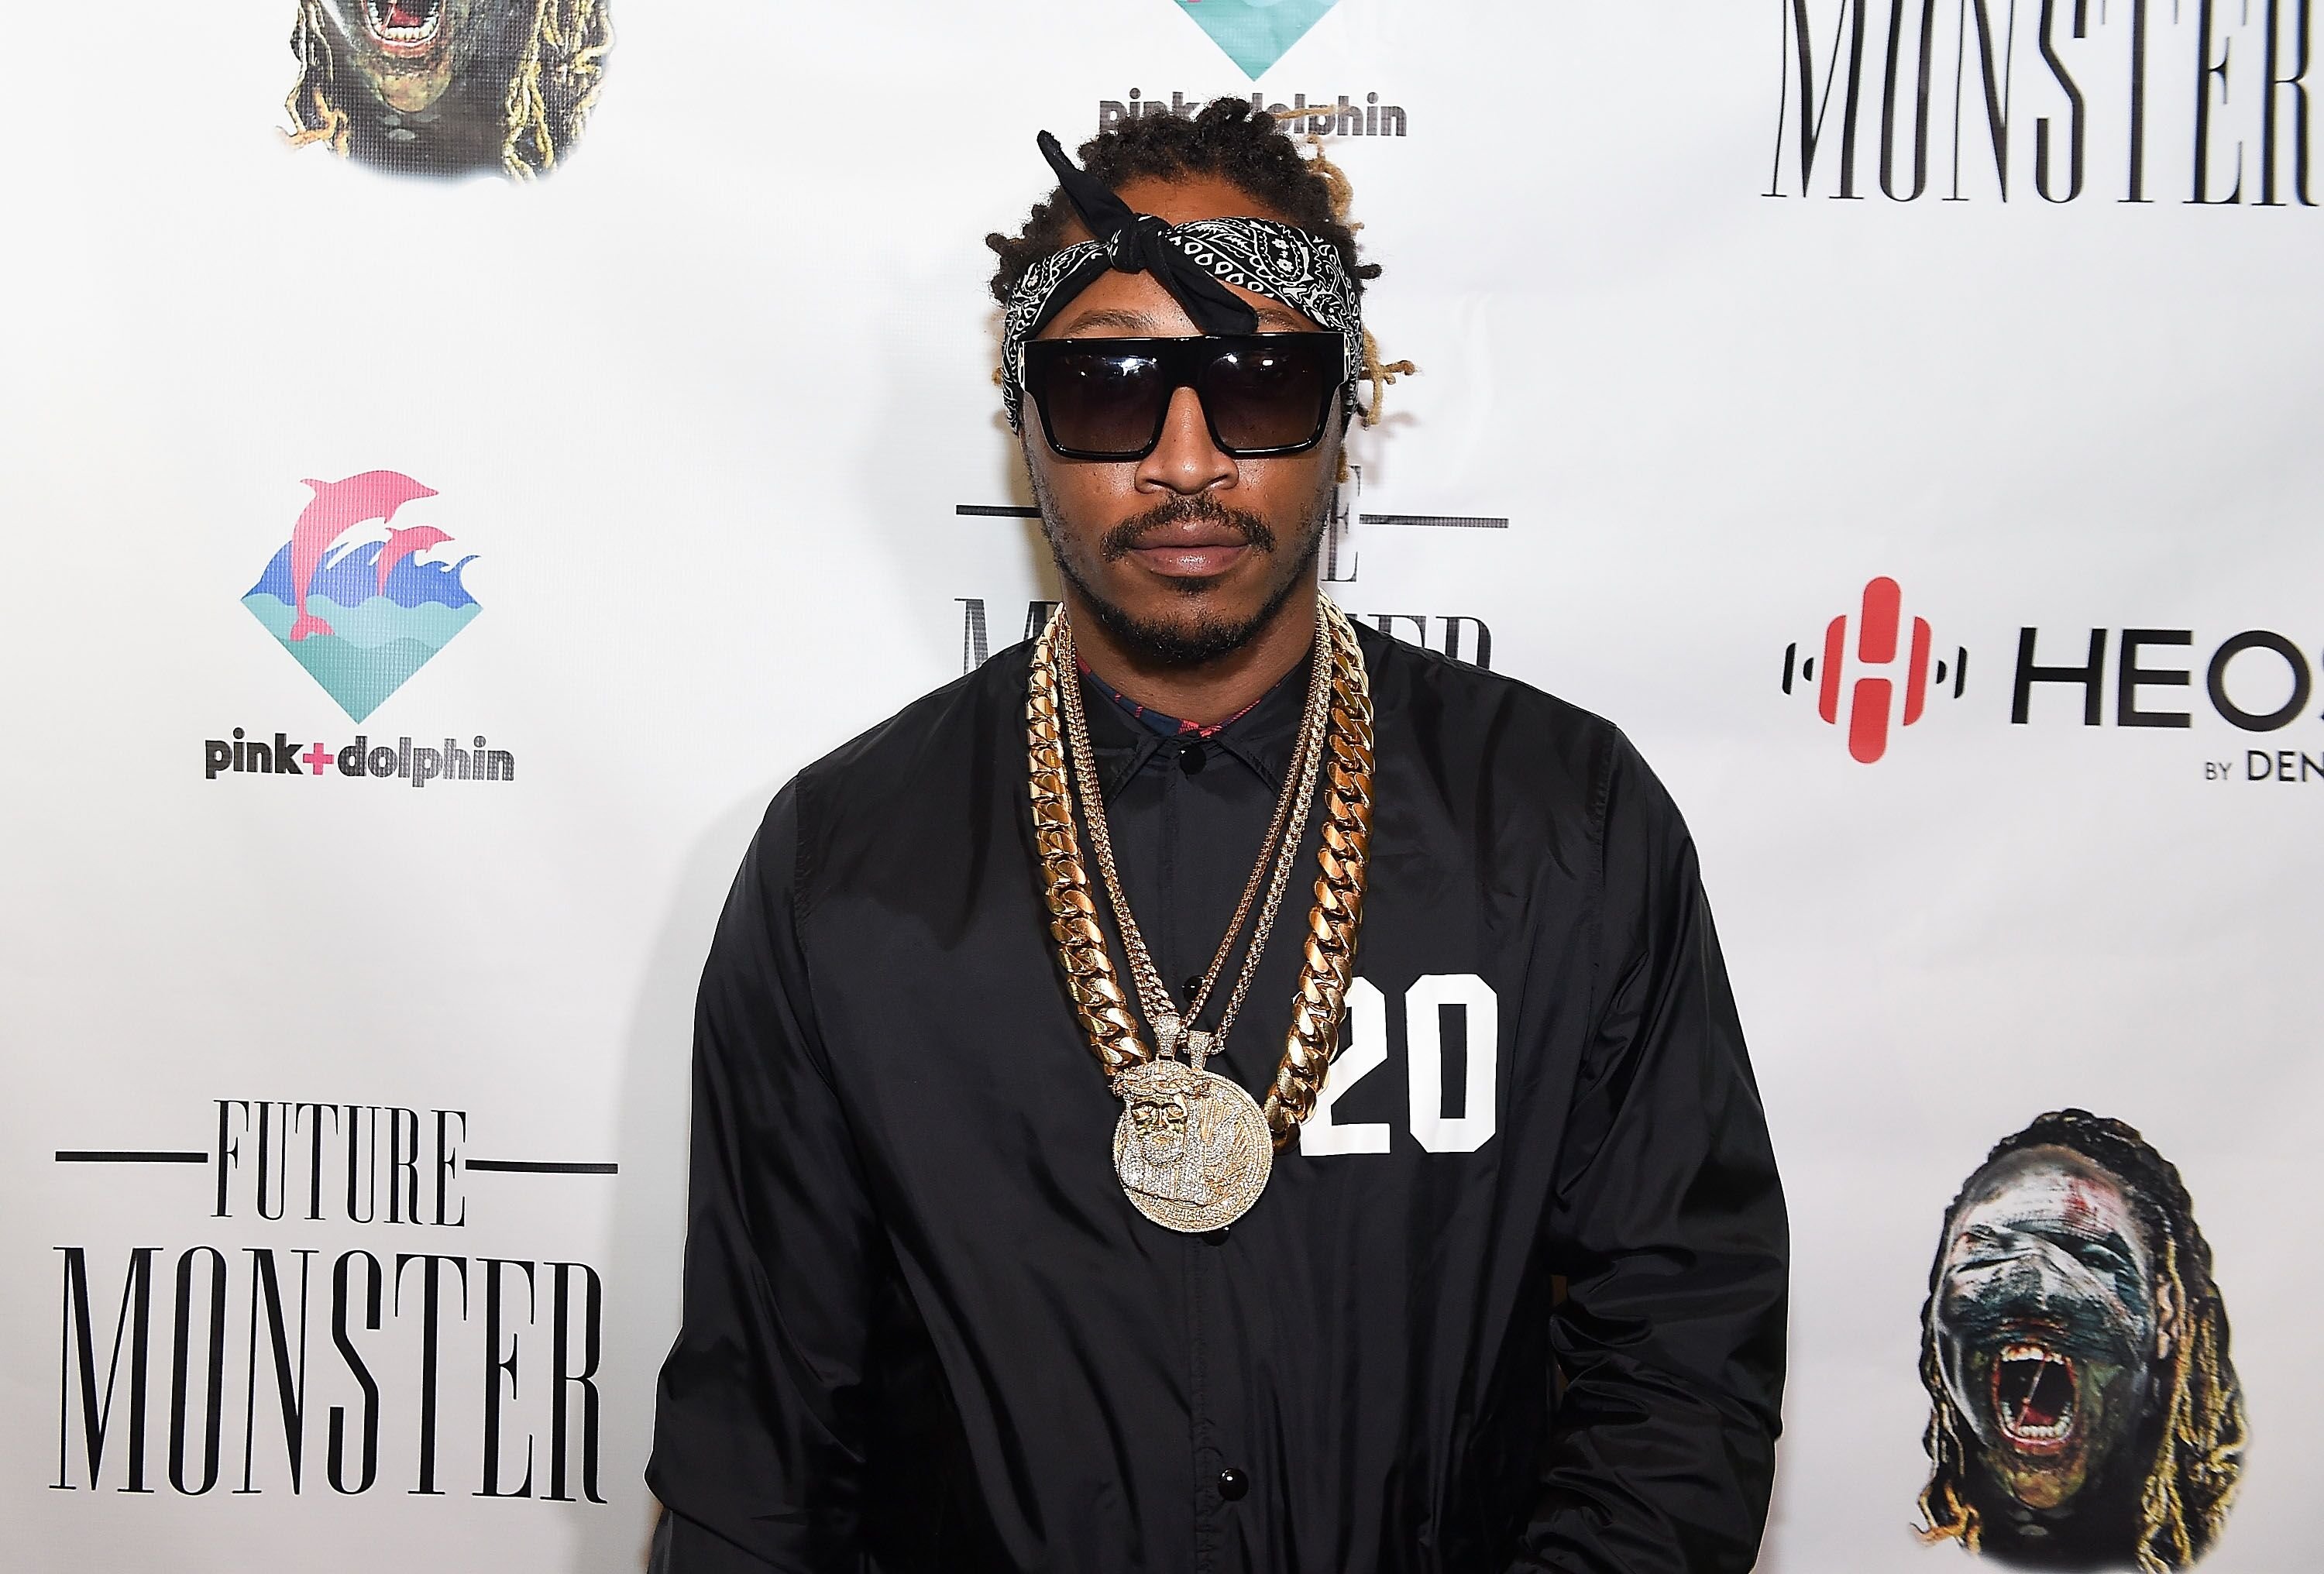 Future Hendrix attending a music event | Source: Getty Images/GlobalImagesUkraine